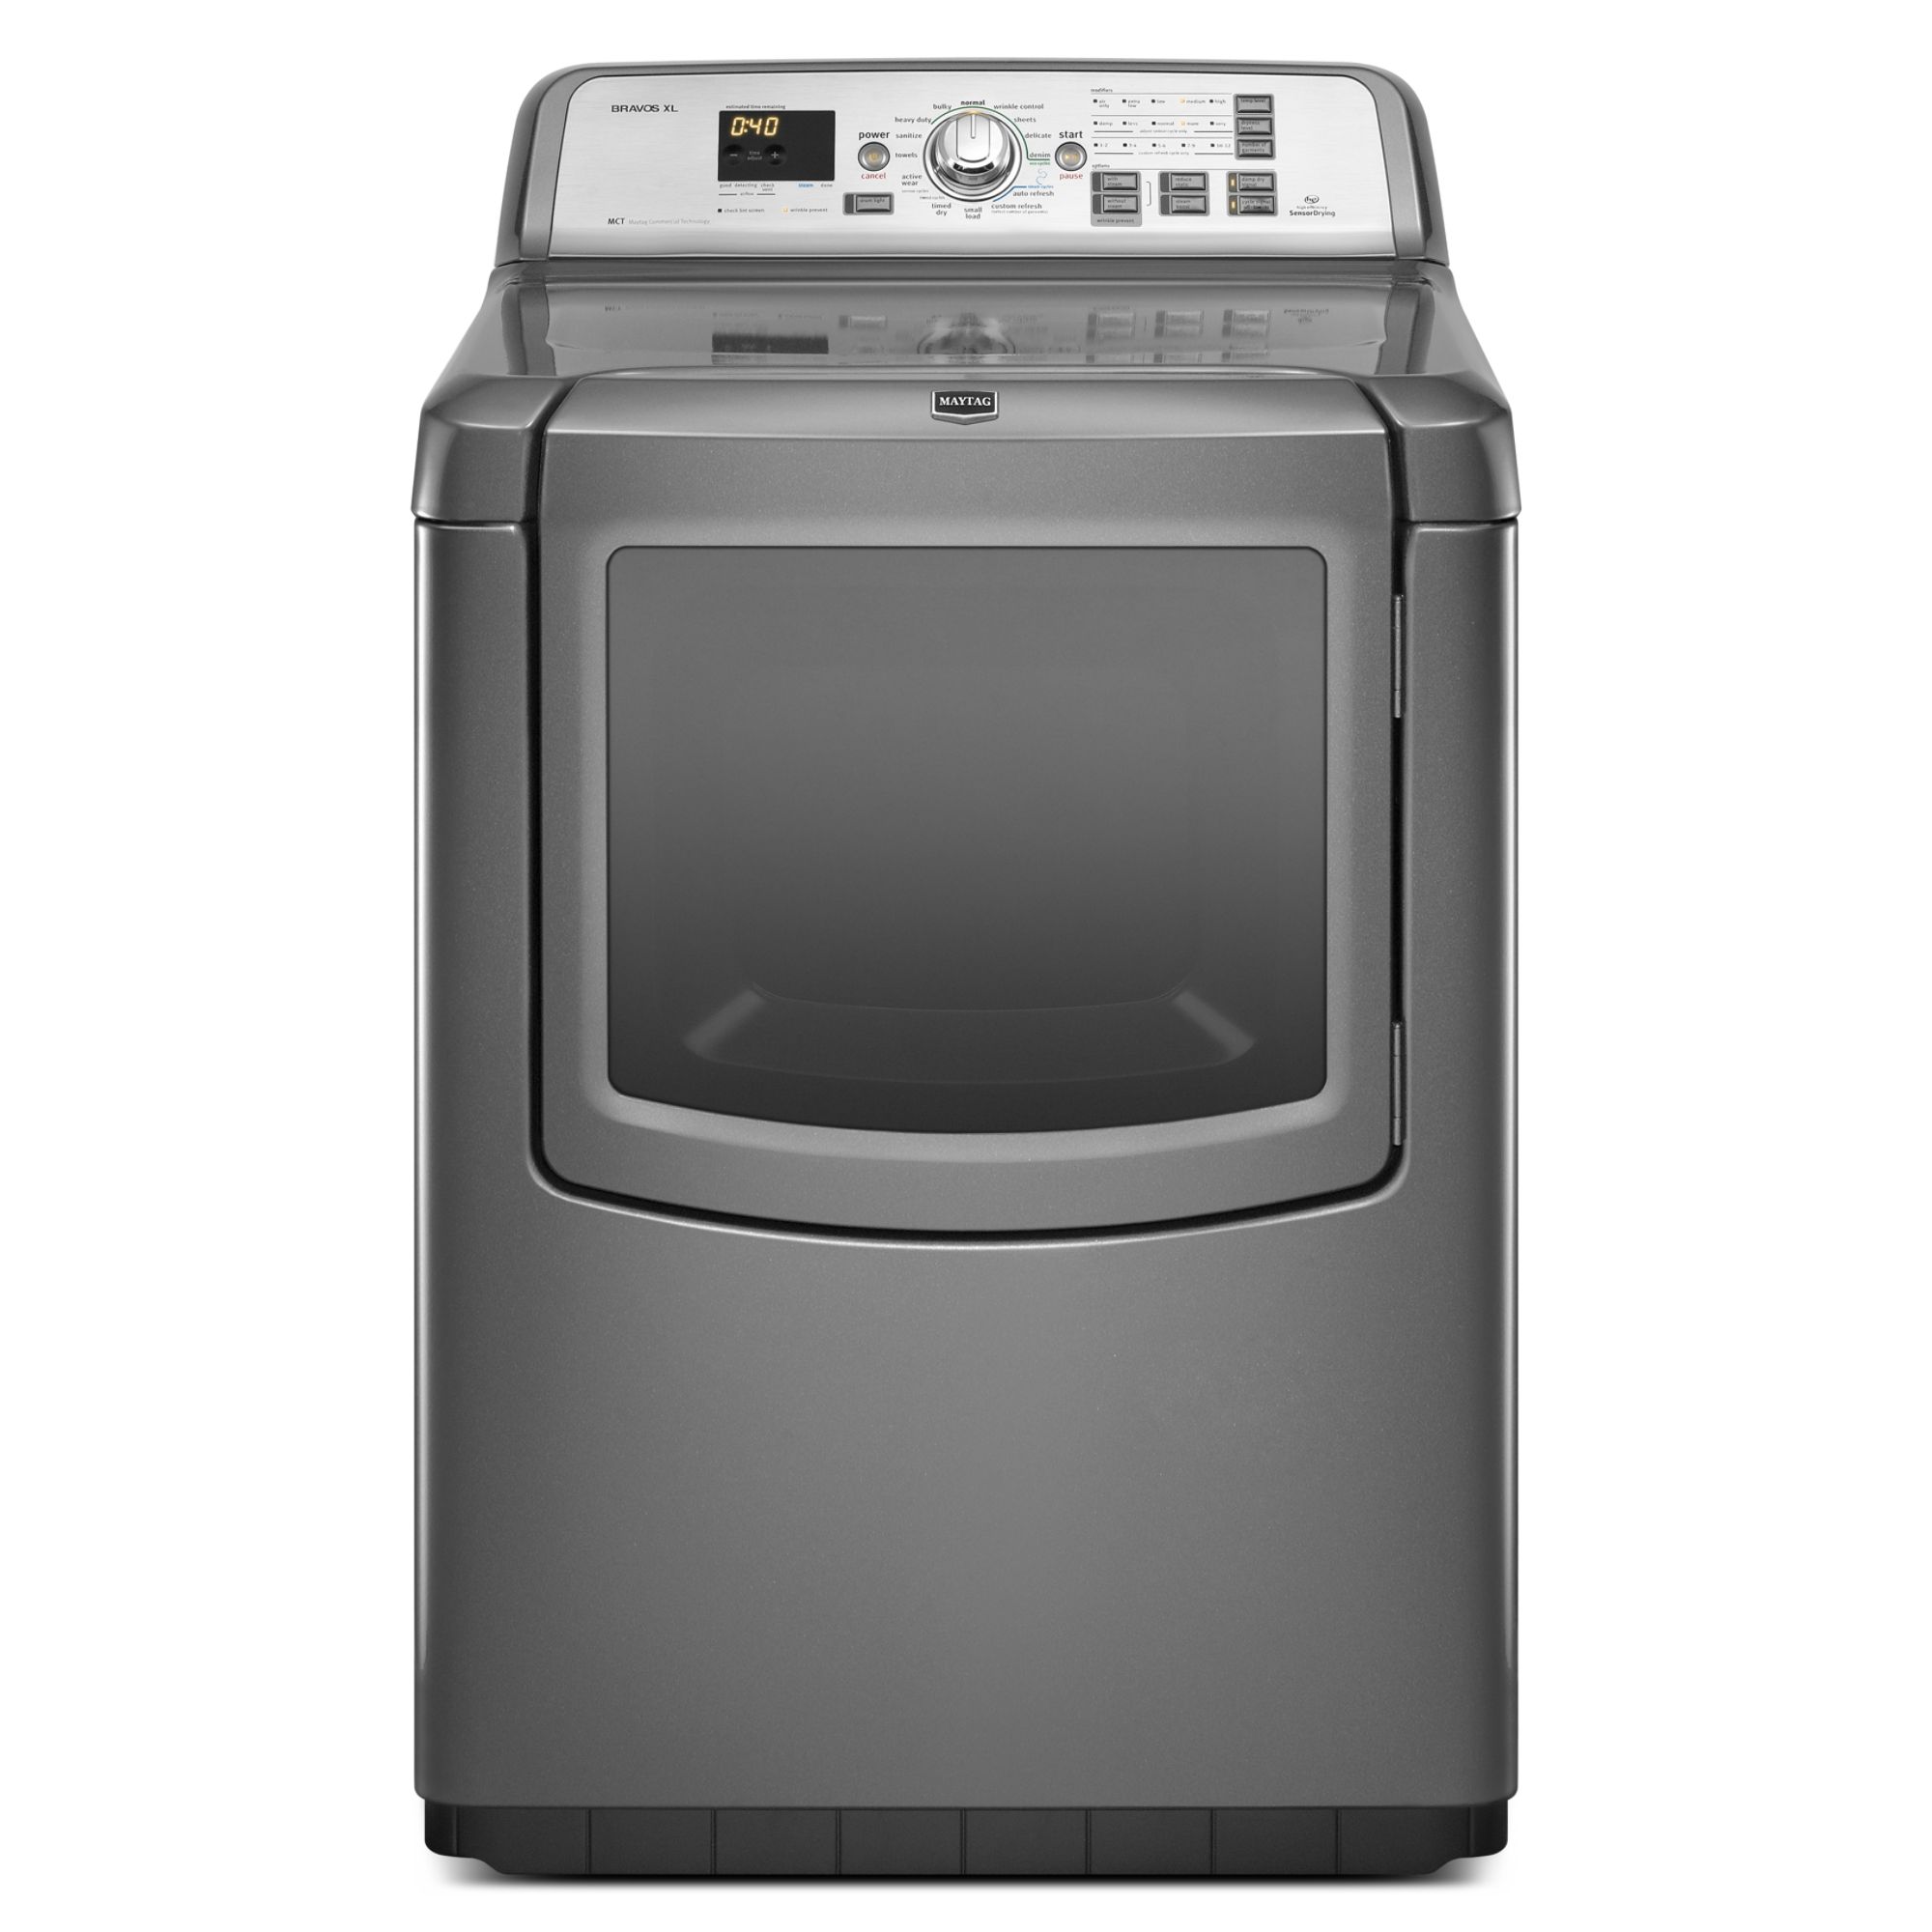 Maytag 7.3 cu. ft. Electric Dryer w/ Steam Cycles - Gray 7.0 cu. ft. and greater